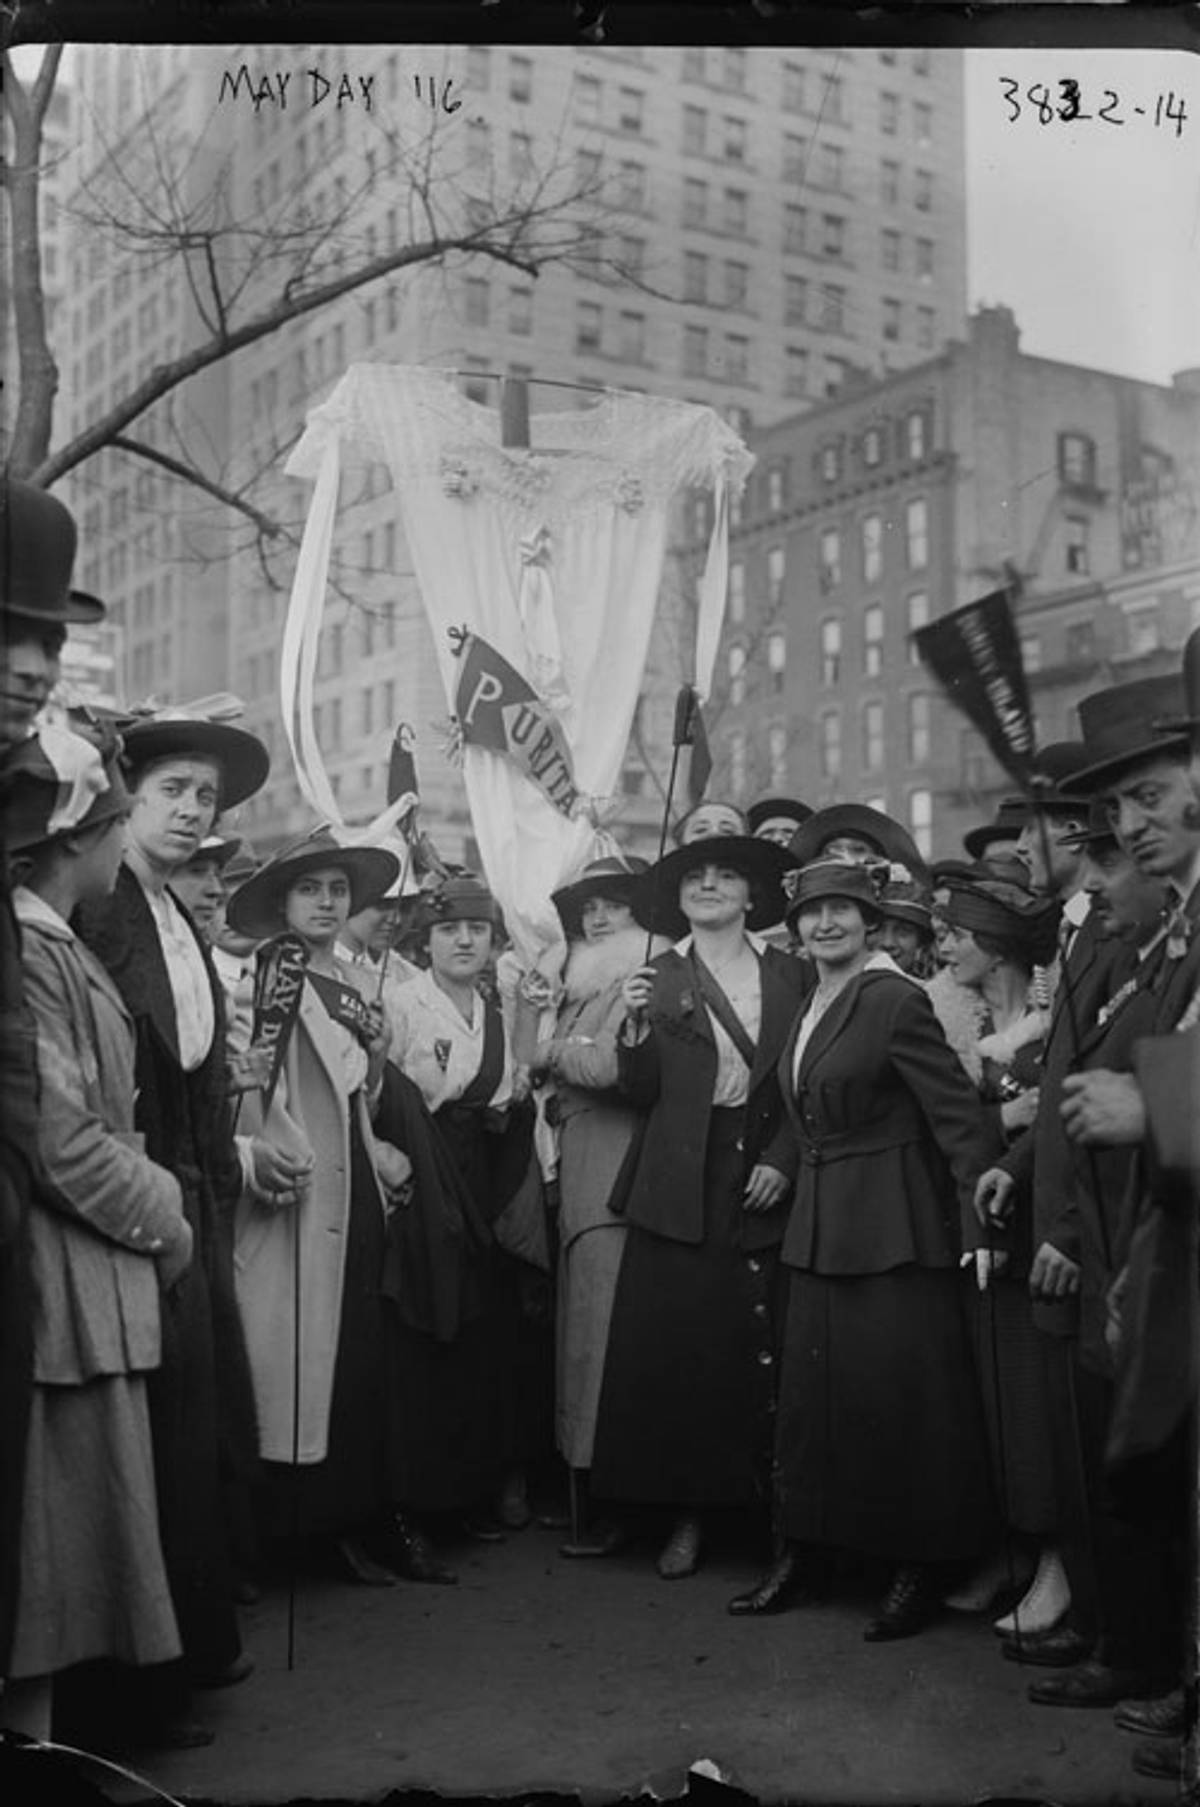 Garment workers from the Puritan Underwear Company participating in the 1916 May Day parade in New York City (Photo: Library of Congress)